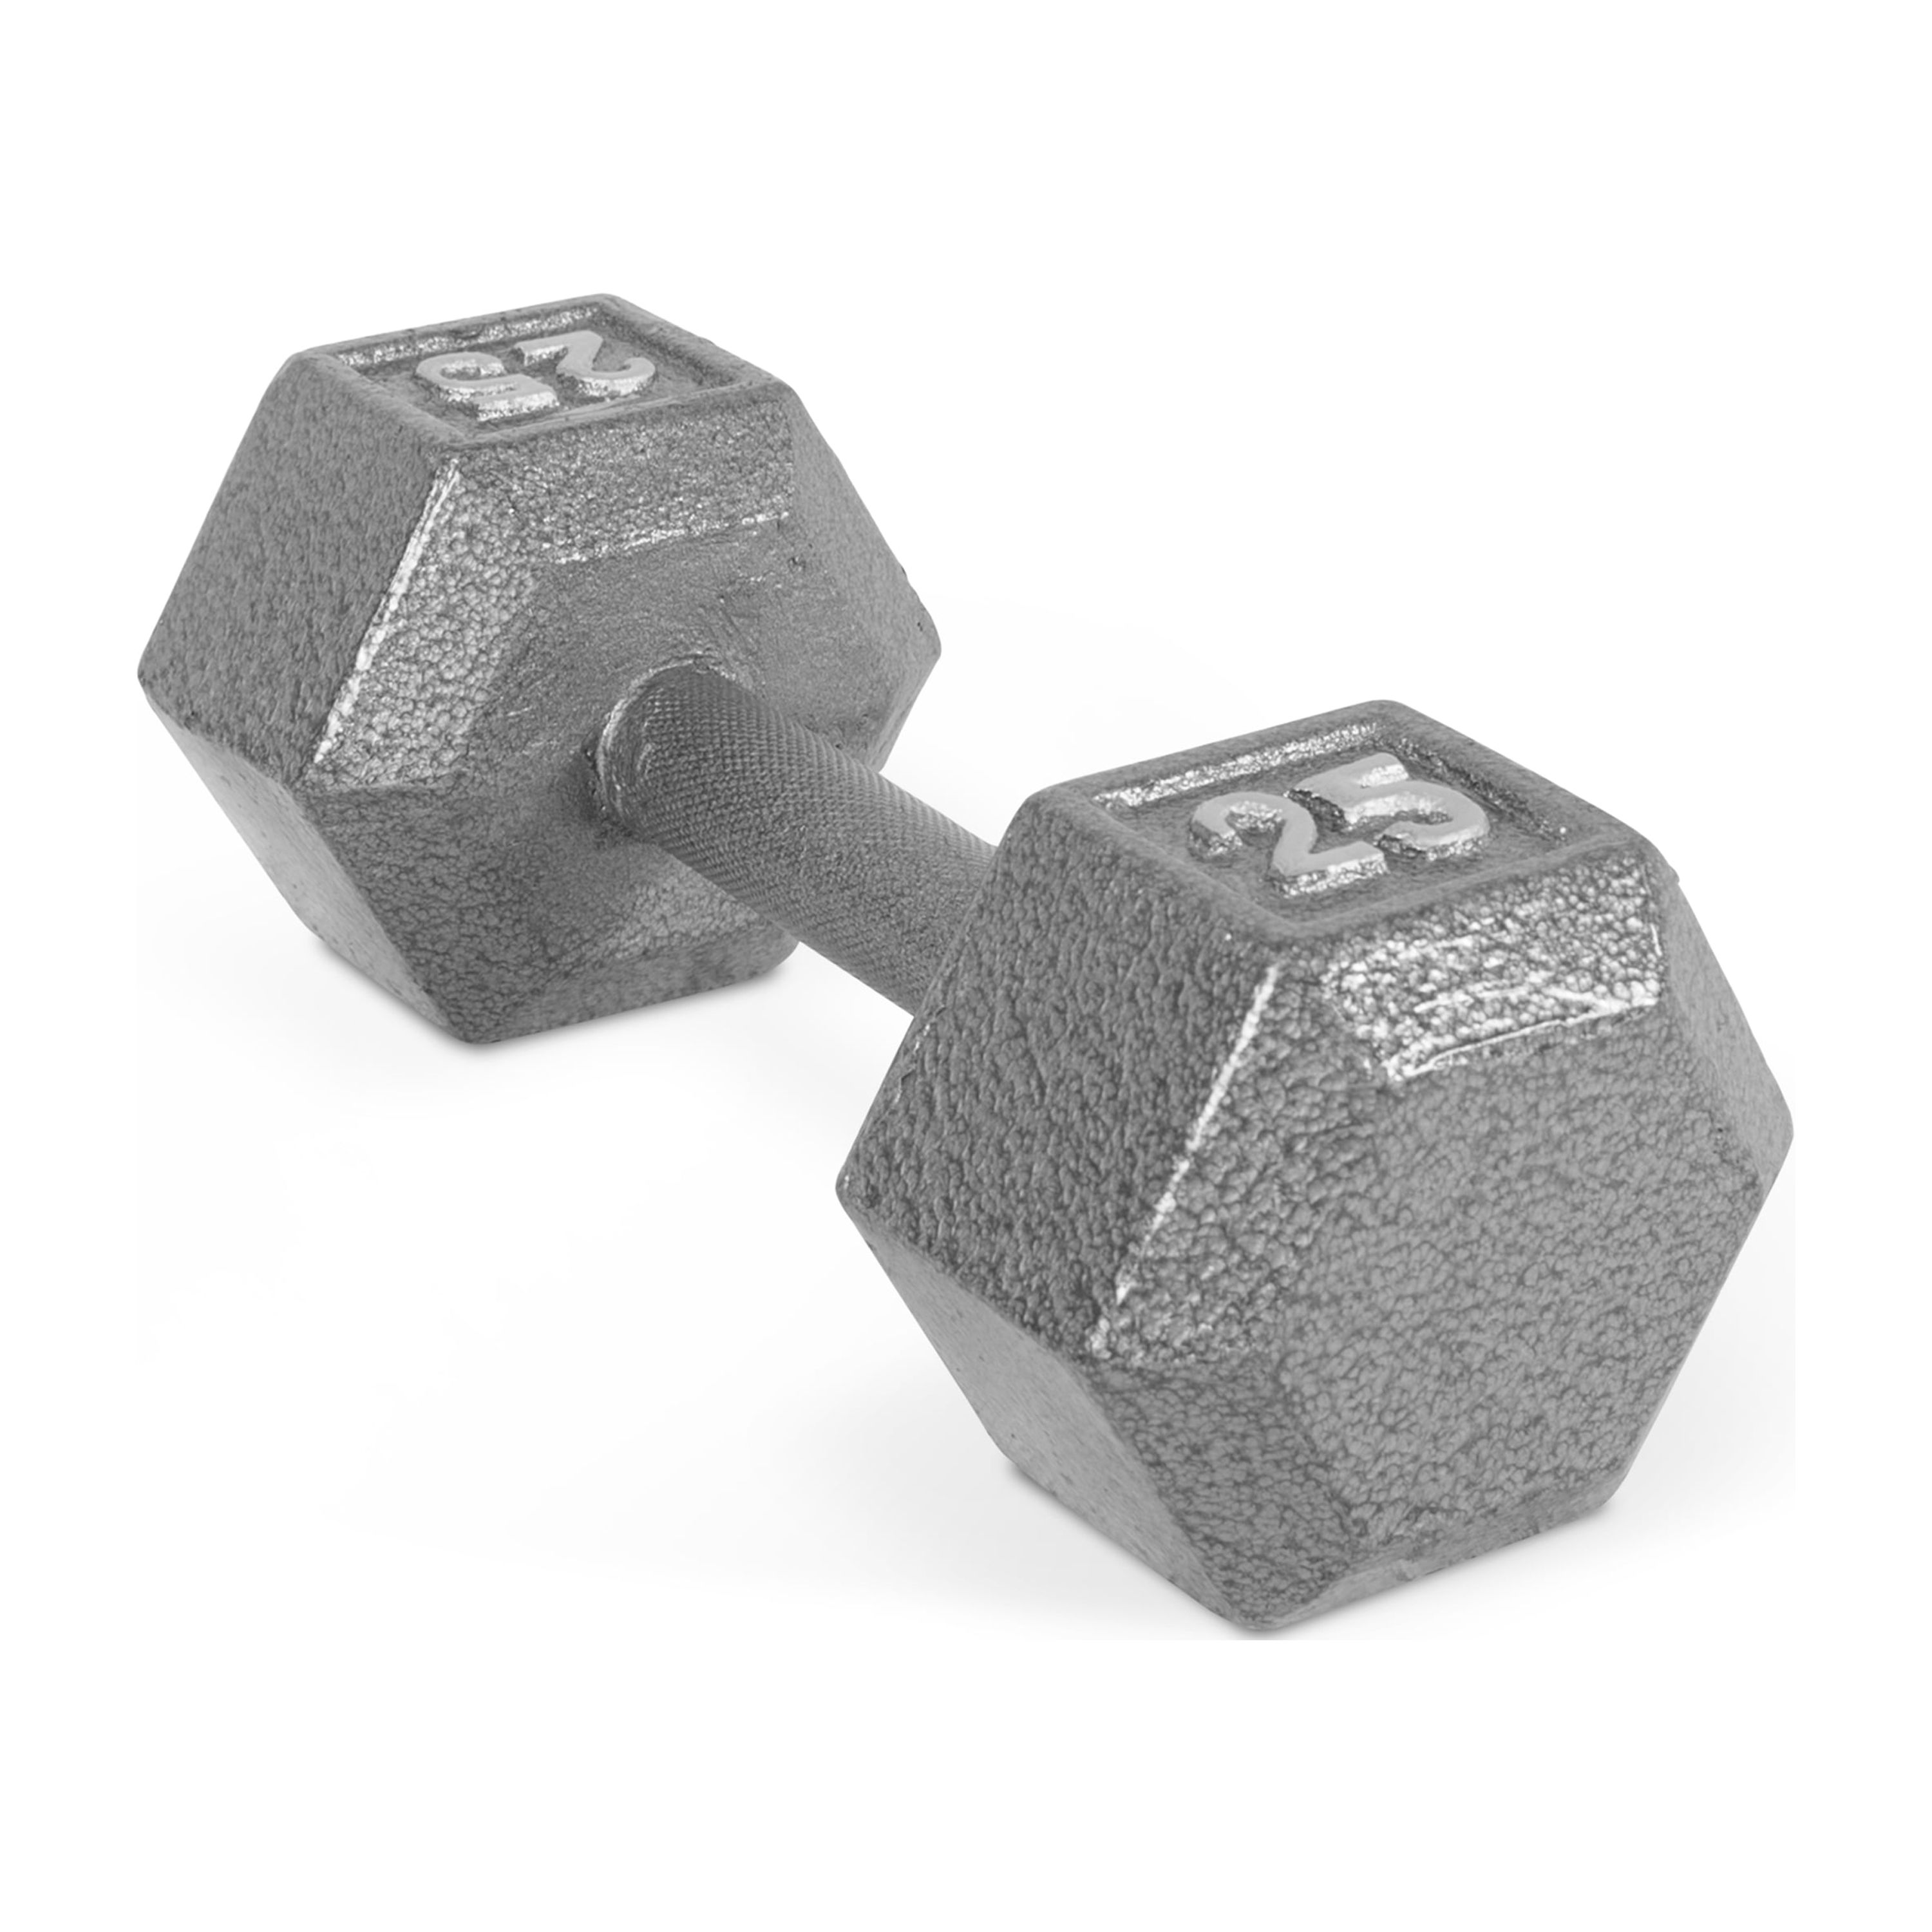 CAP Barbell 25lb Cast Iron Hex Dumbbell, Single - image 1 of 6